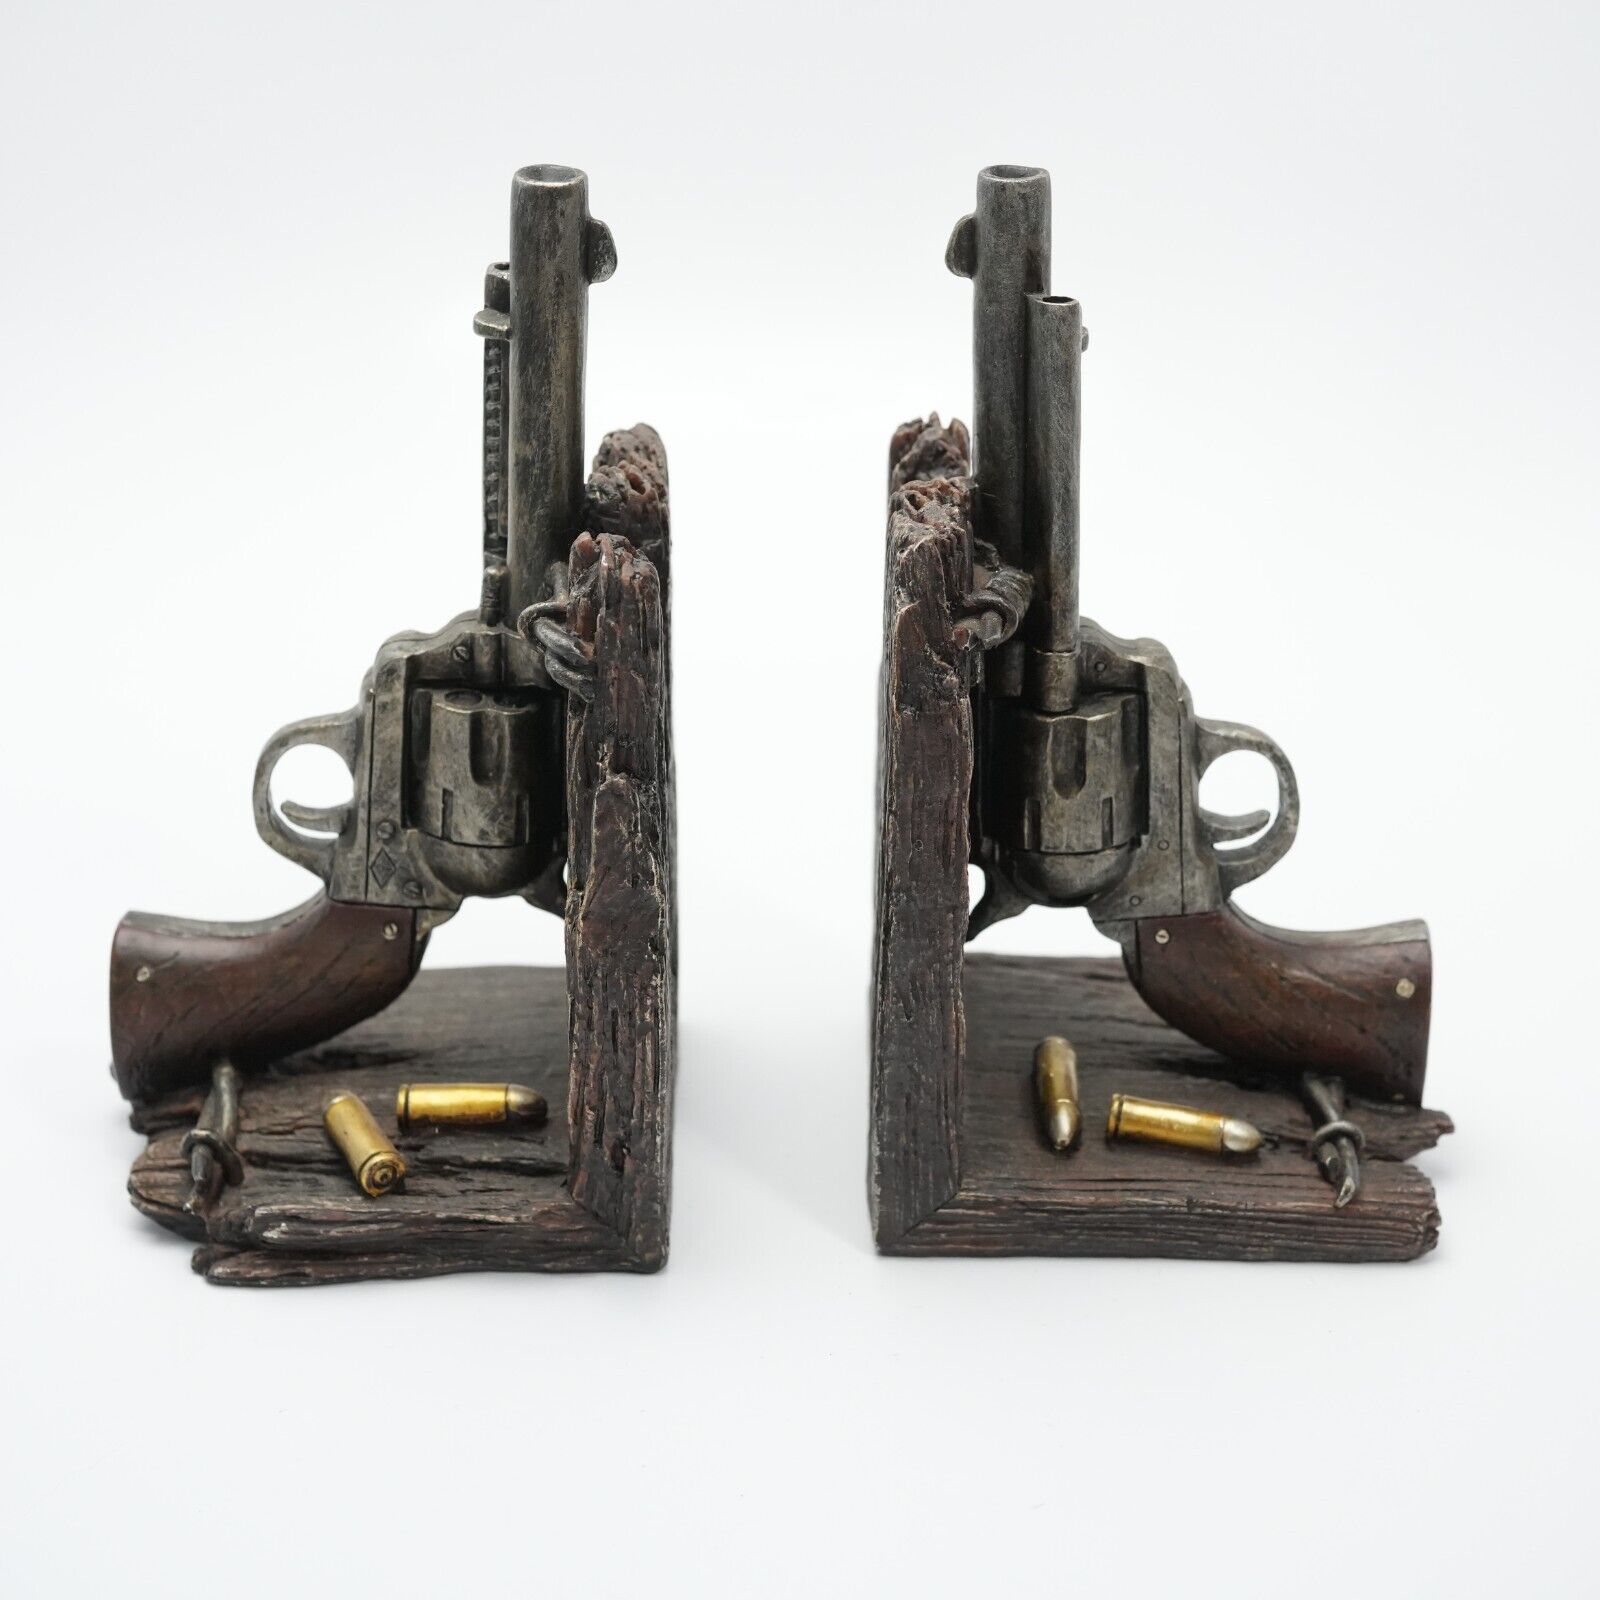 Western Cowboy The Old West Pistol Six Shooter Gun Bookends